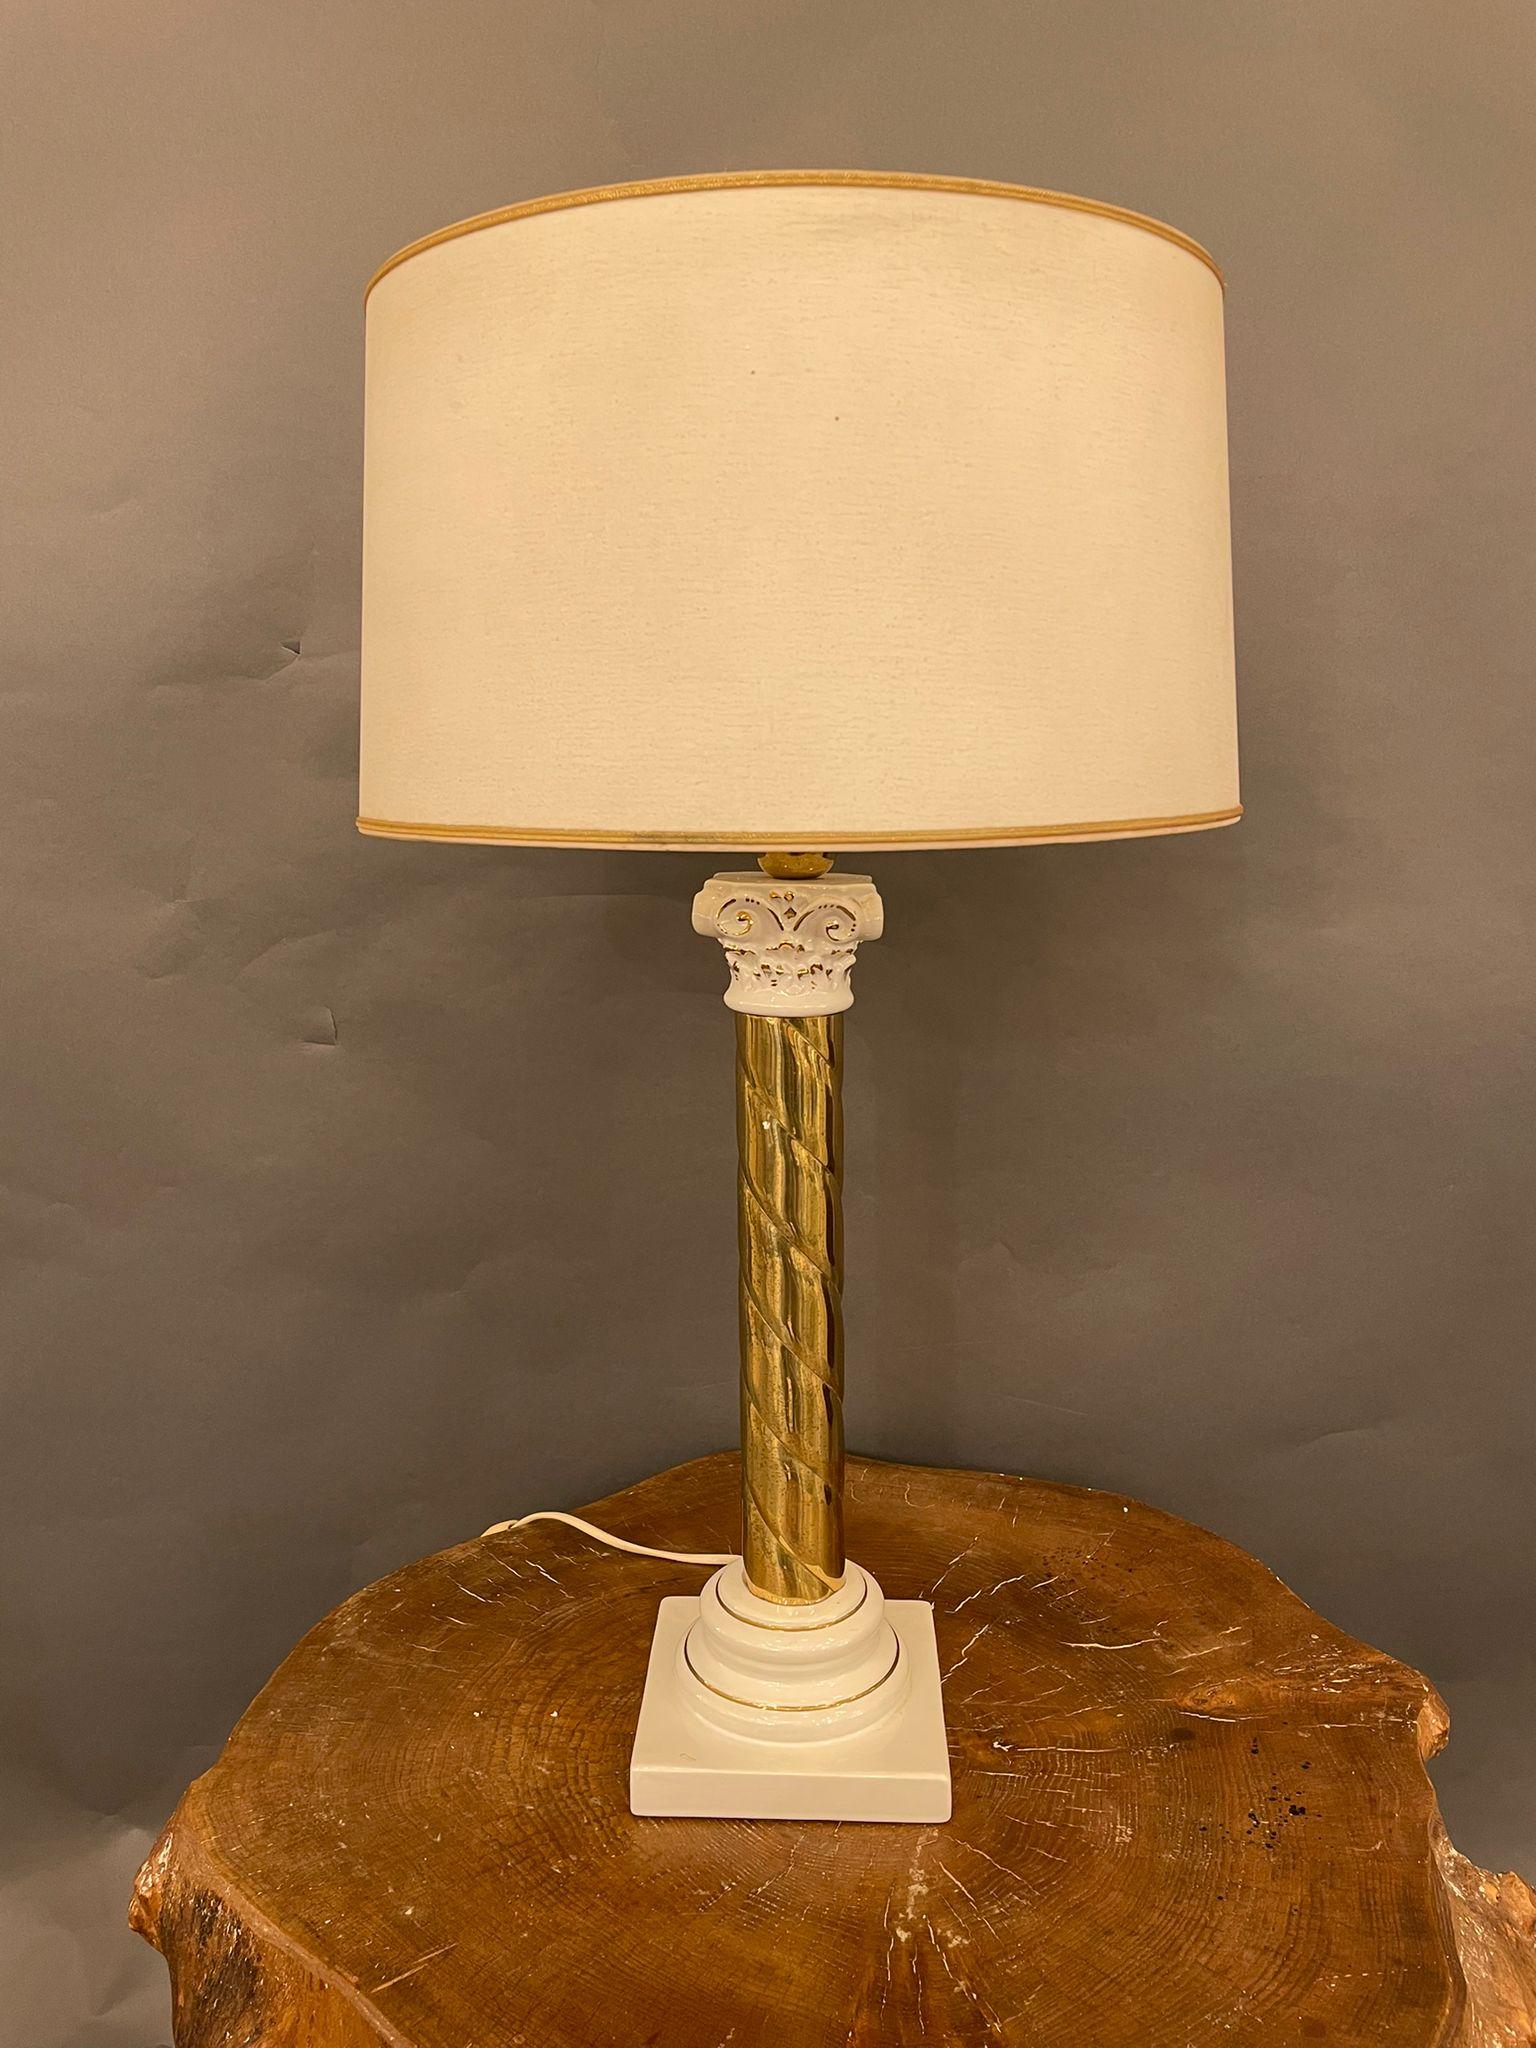 A rare Table lamp with twisted gold ceramic with a beautiful white top in Corinthian-style, by Stefano Cevoli. Italy 1940s.